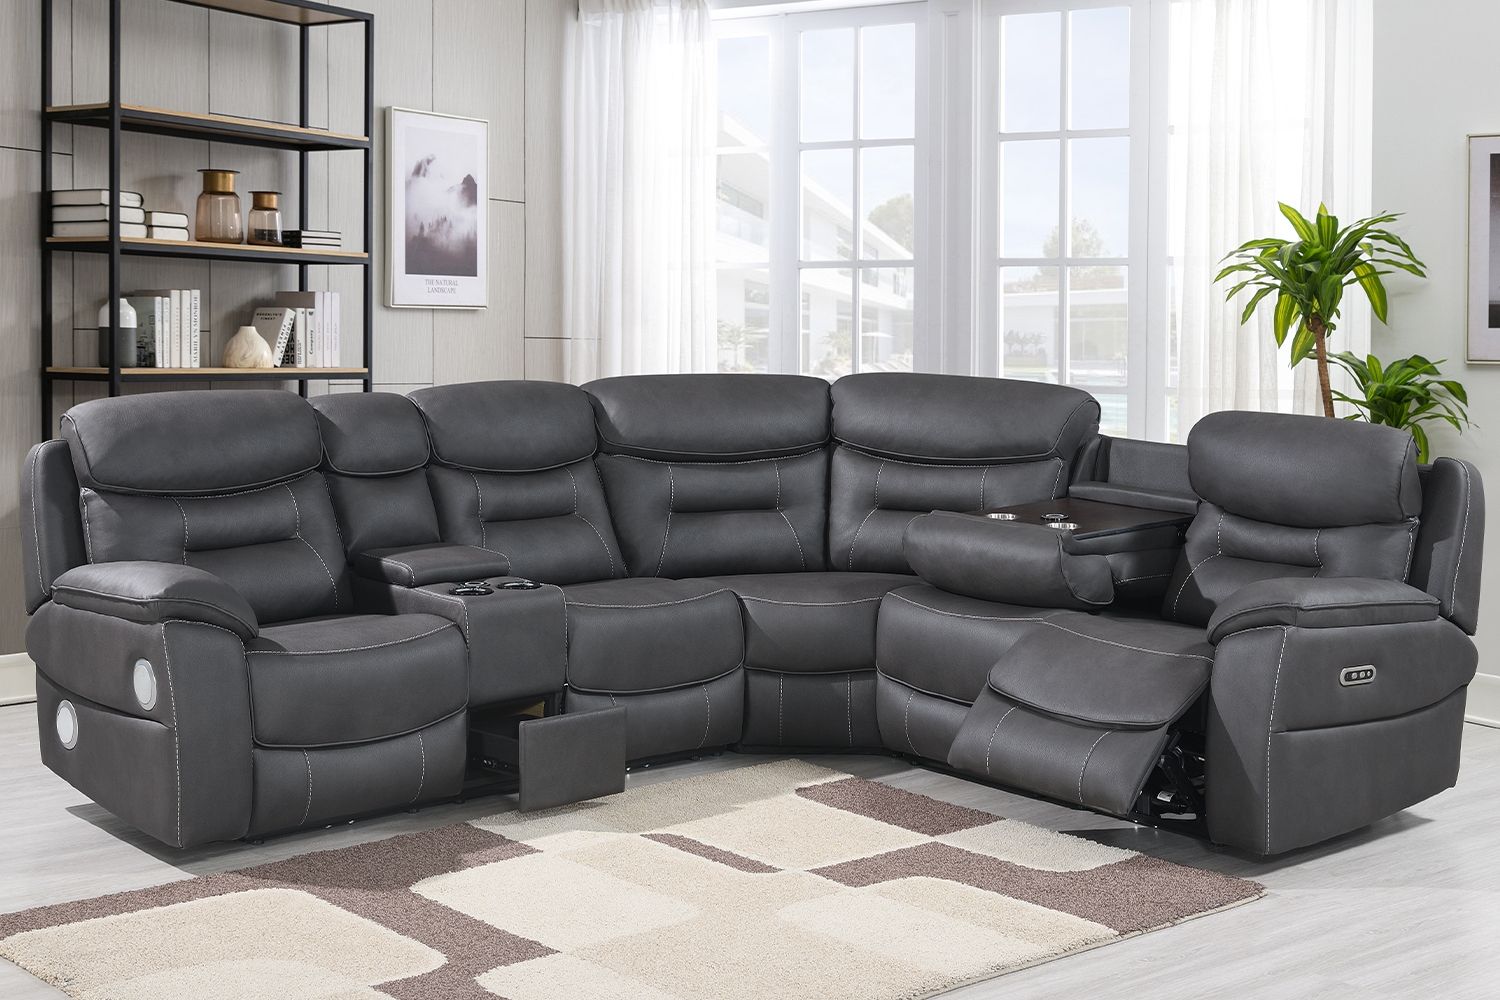 Series 3 – Ultimate Smart Tech Power Recliner Corner Sofa – Furniture World For Modern Velvet Sofa Recliners With Storage (View 12 of 15)